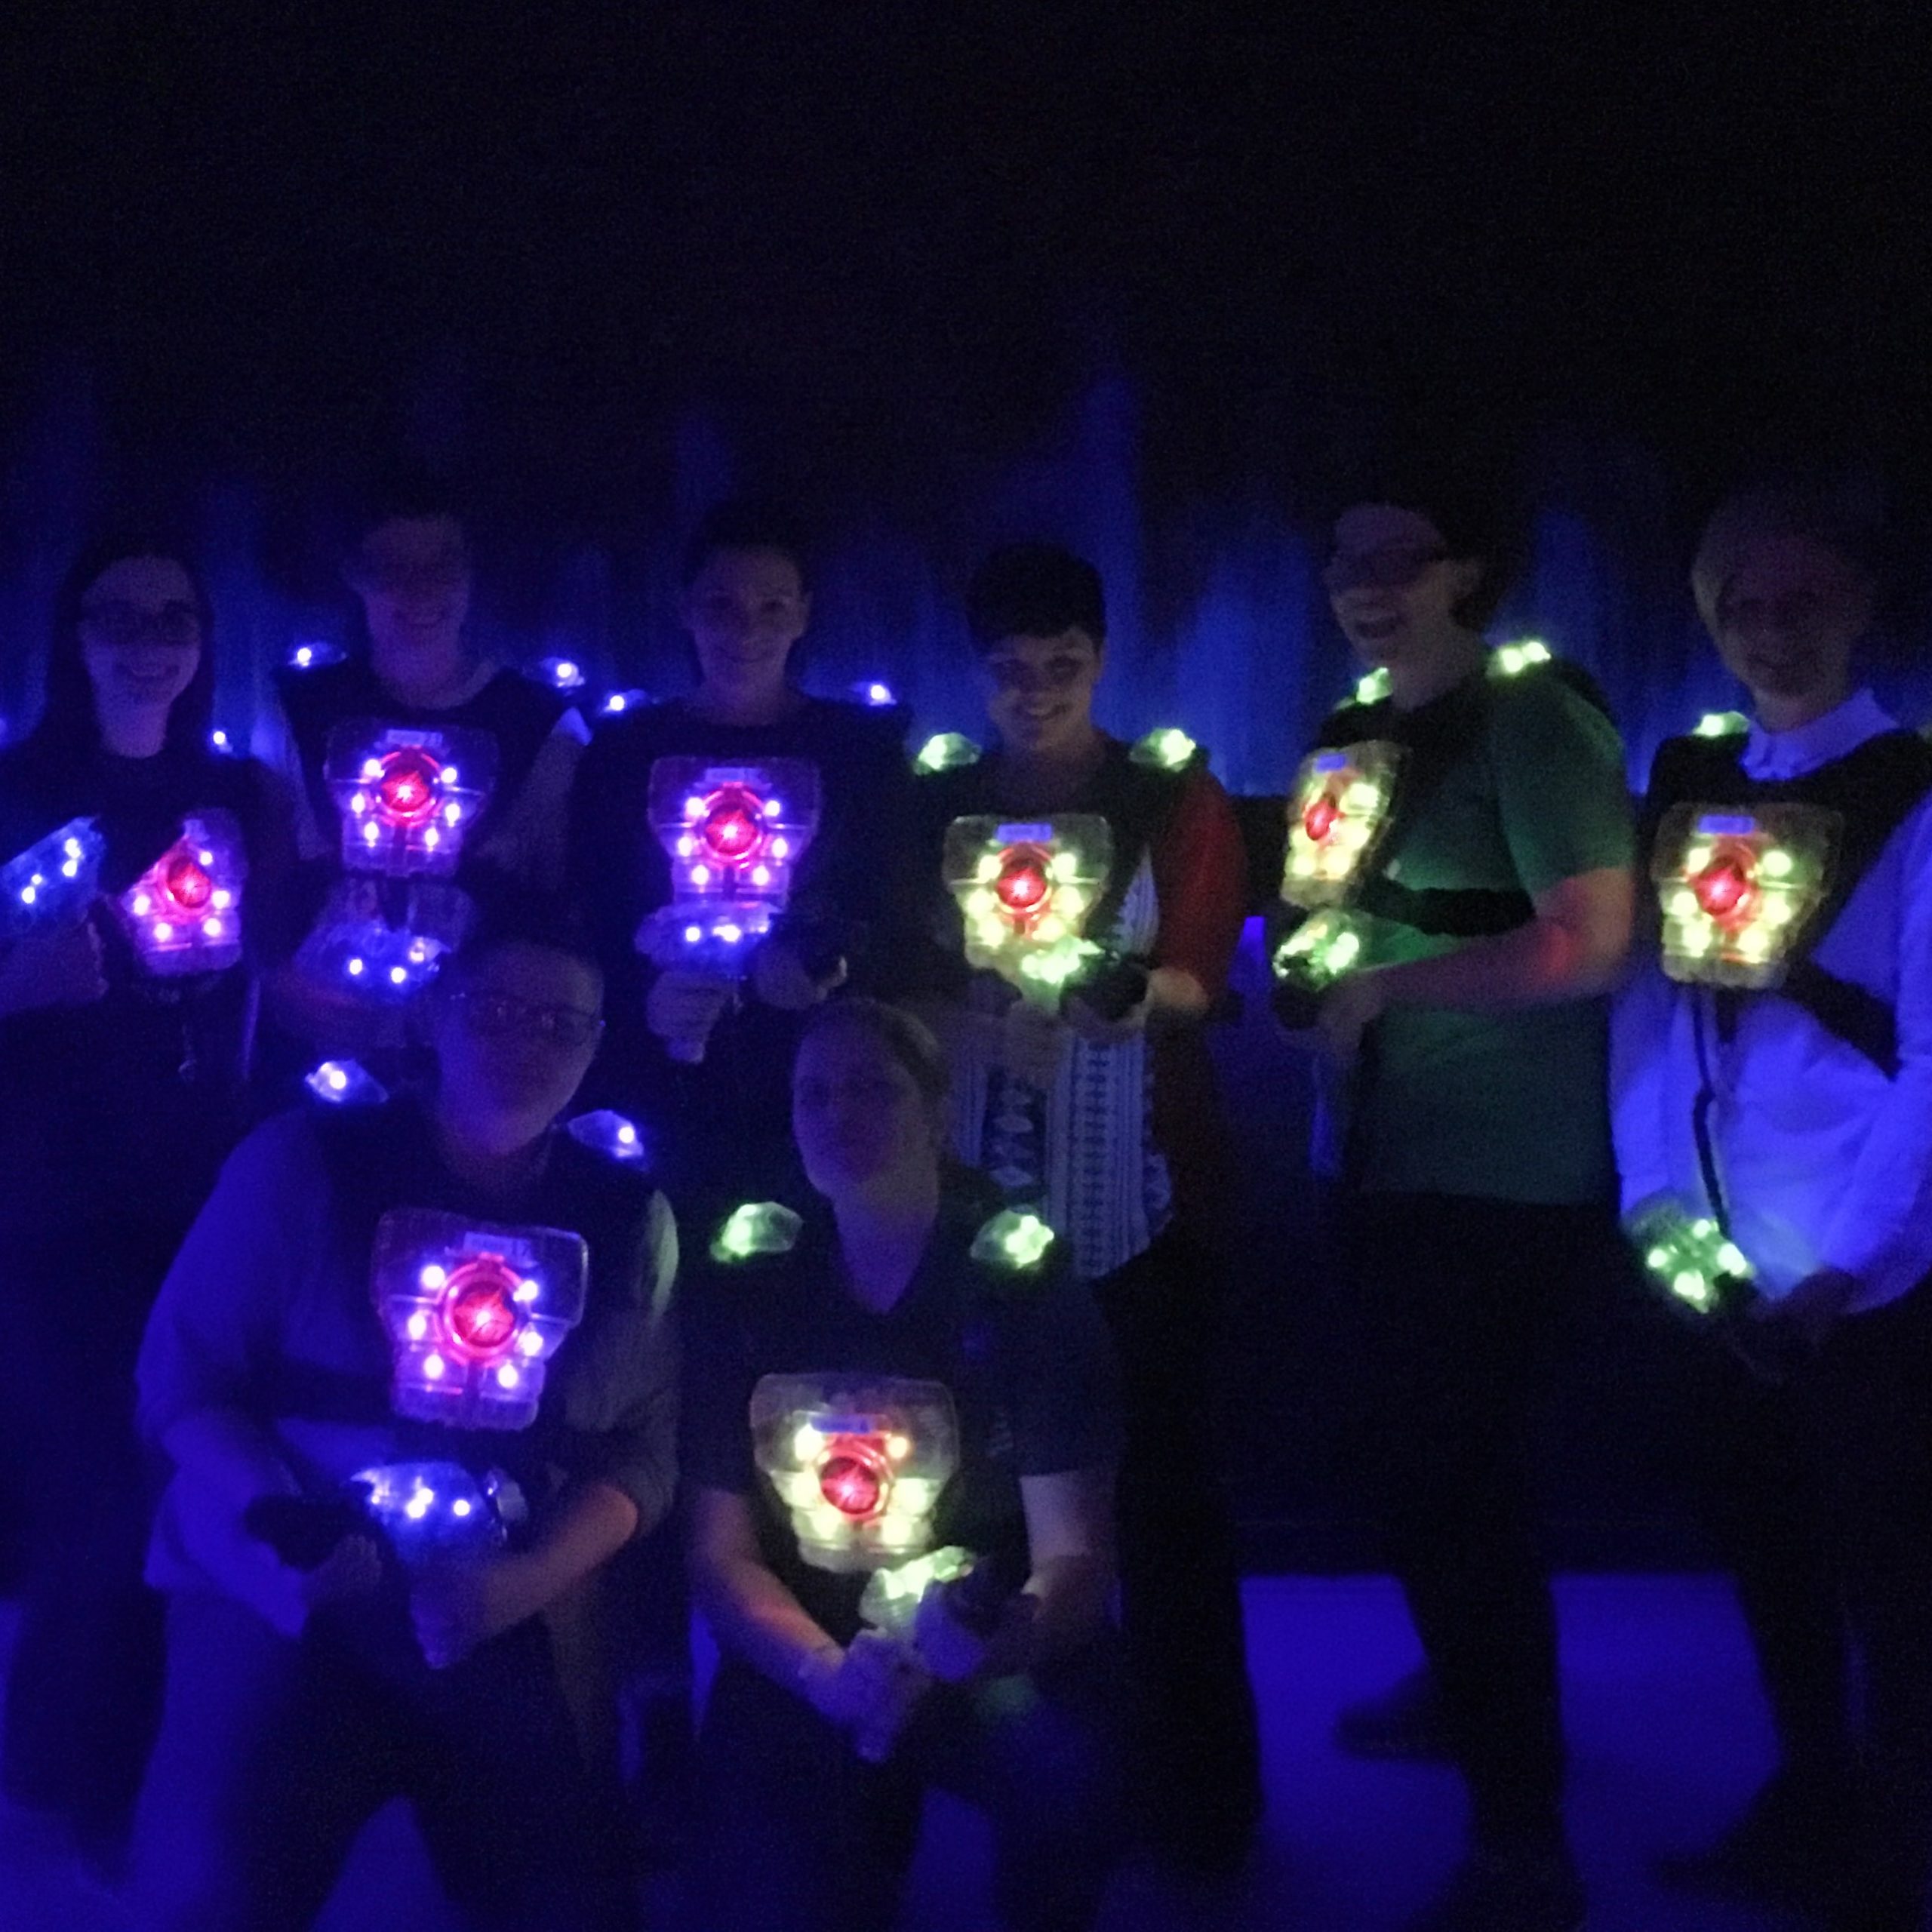 Kick Point team playing laser tag, illuminated by their glowing vests and laser guns in a dark room